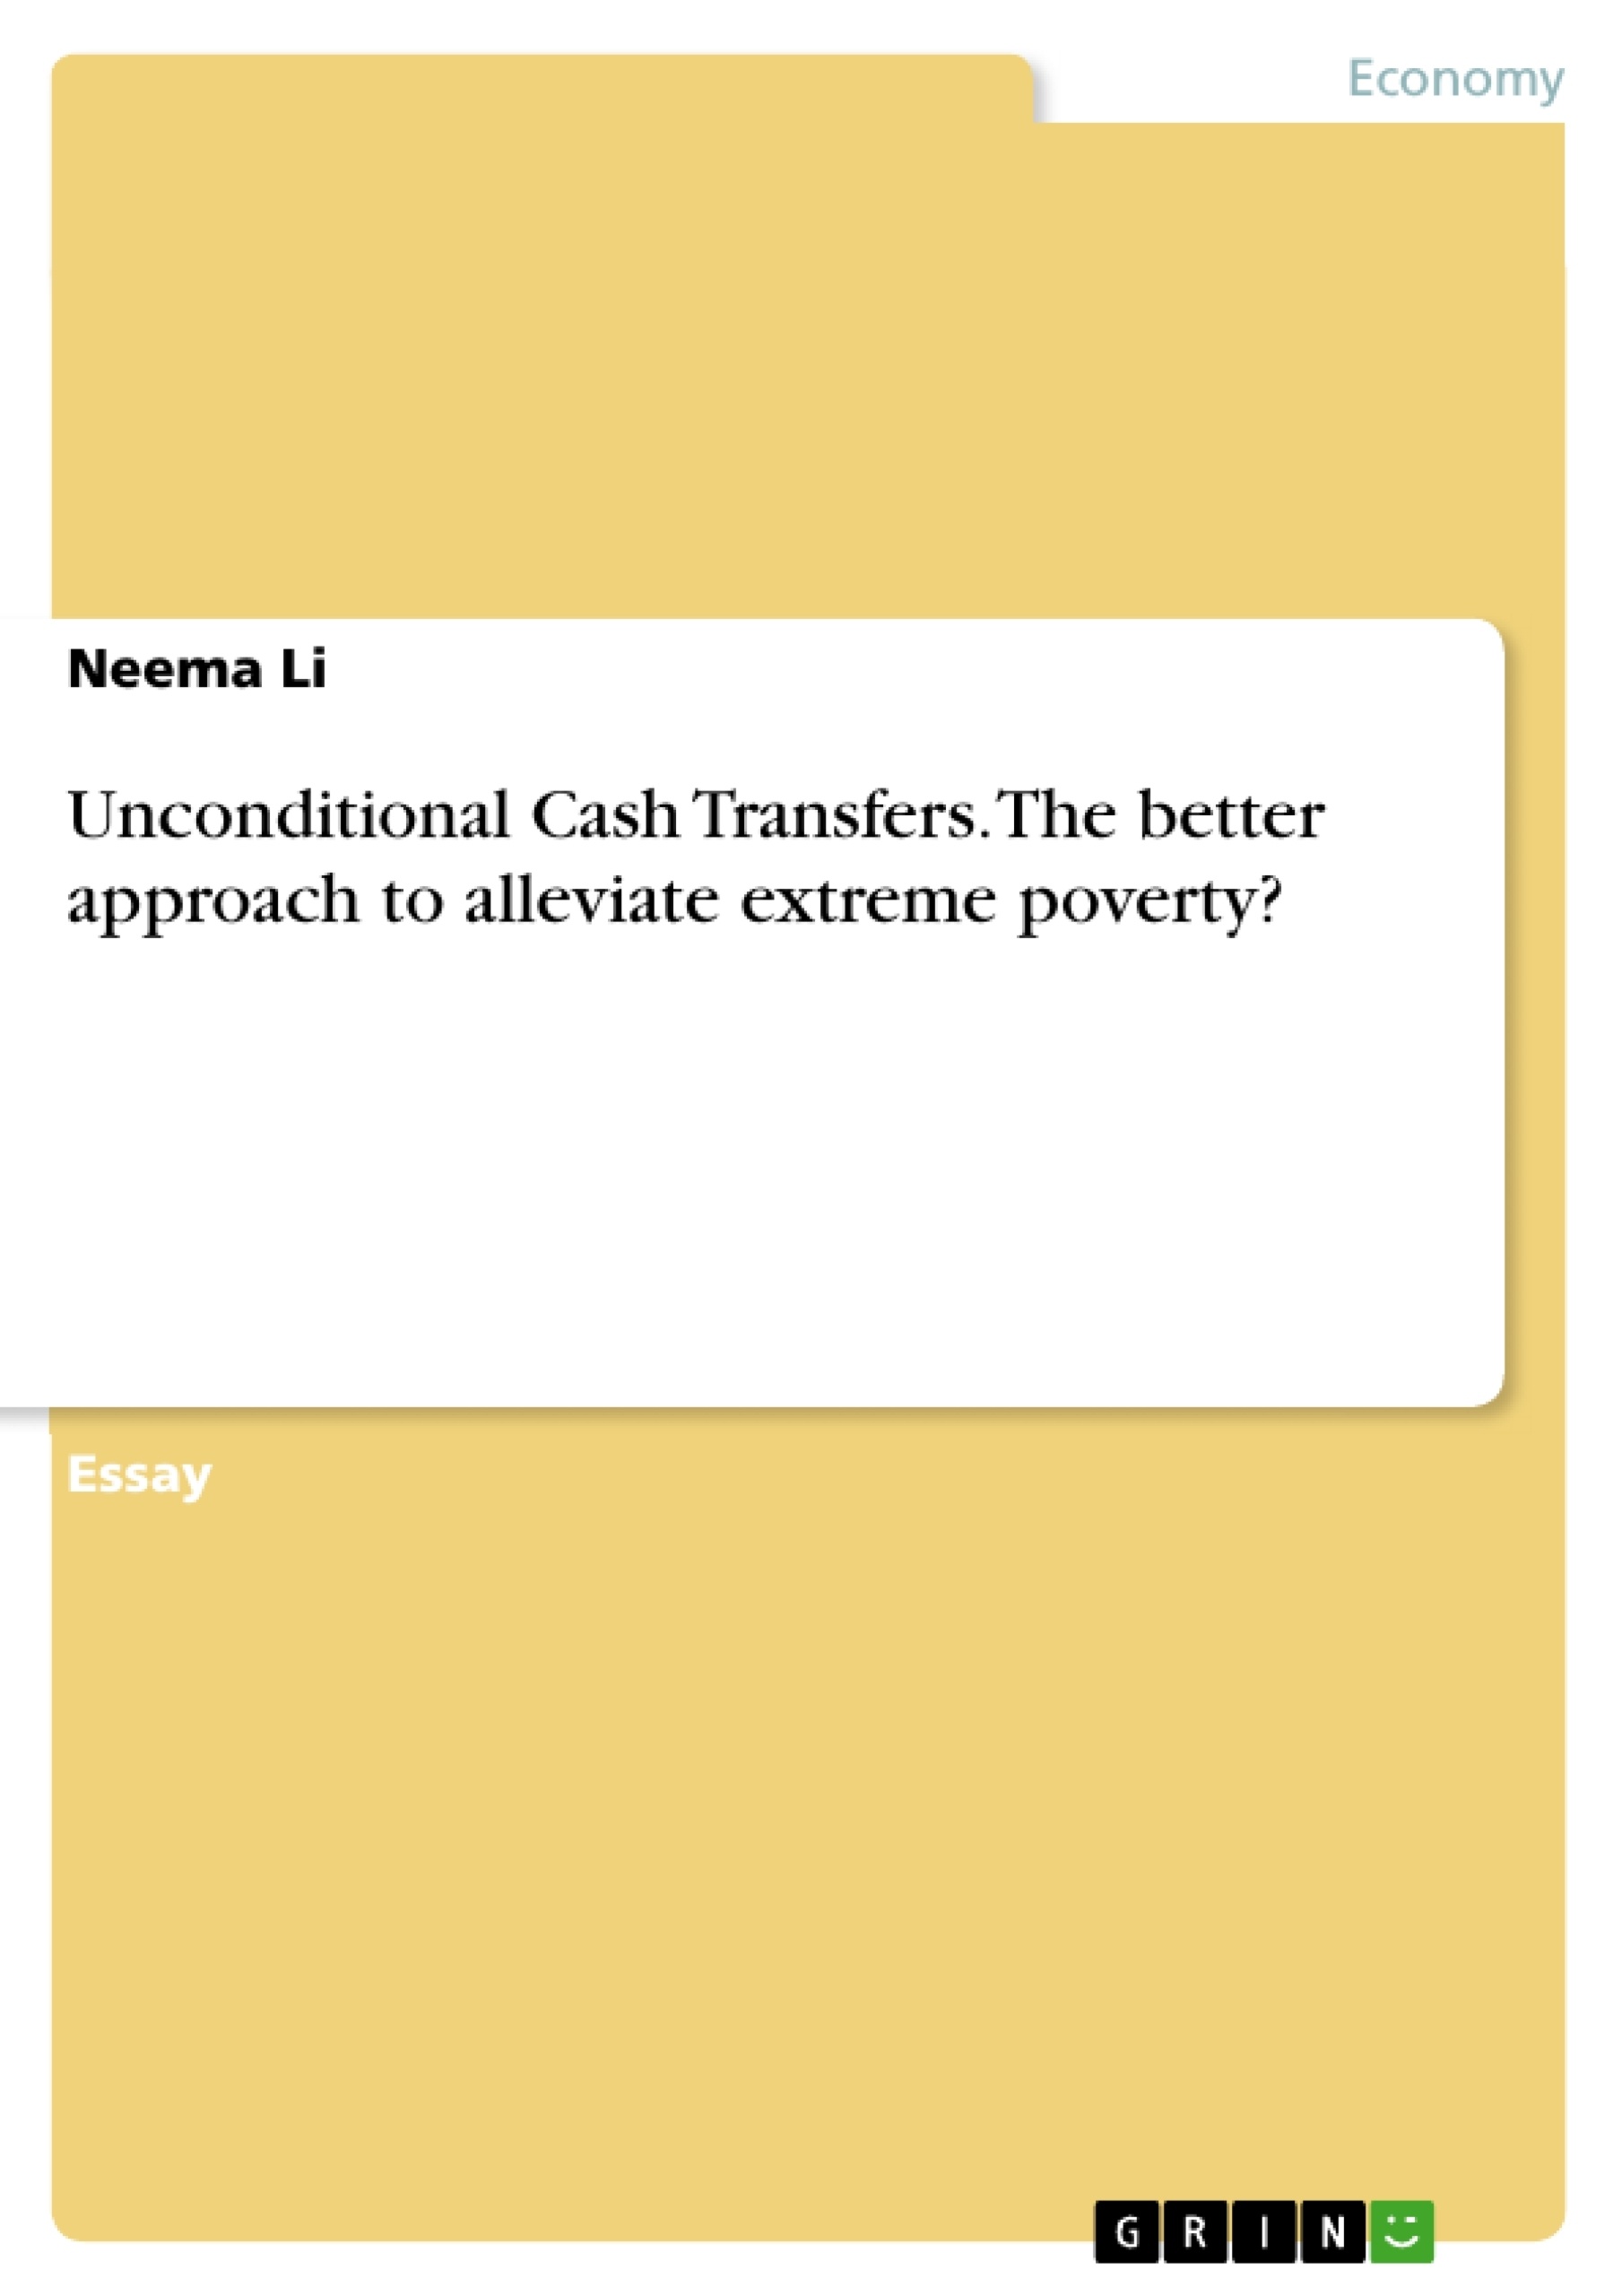 Titre: Unconditional Cash Transfers. The better approach to alleviate extreme poverty?